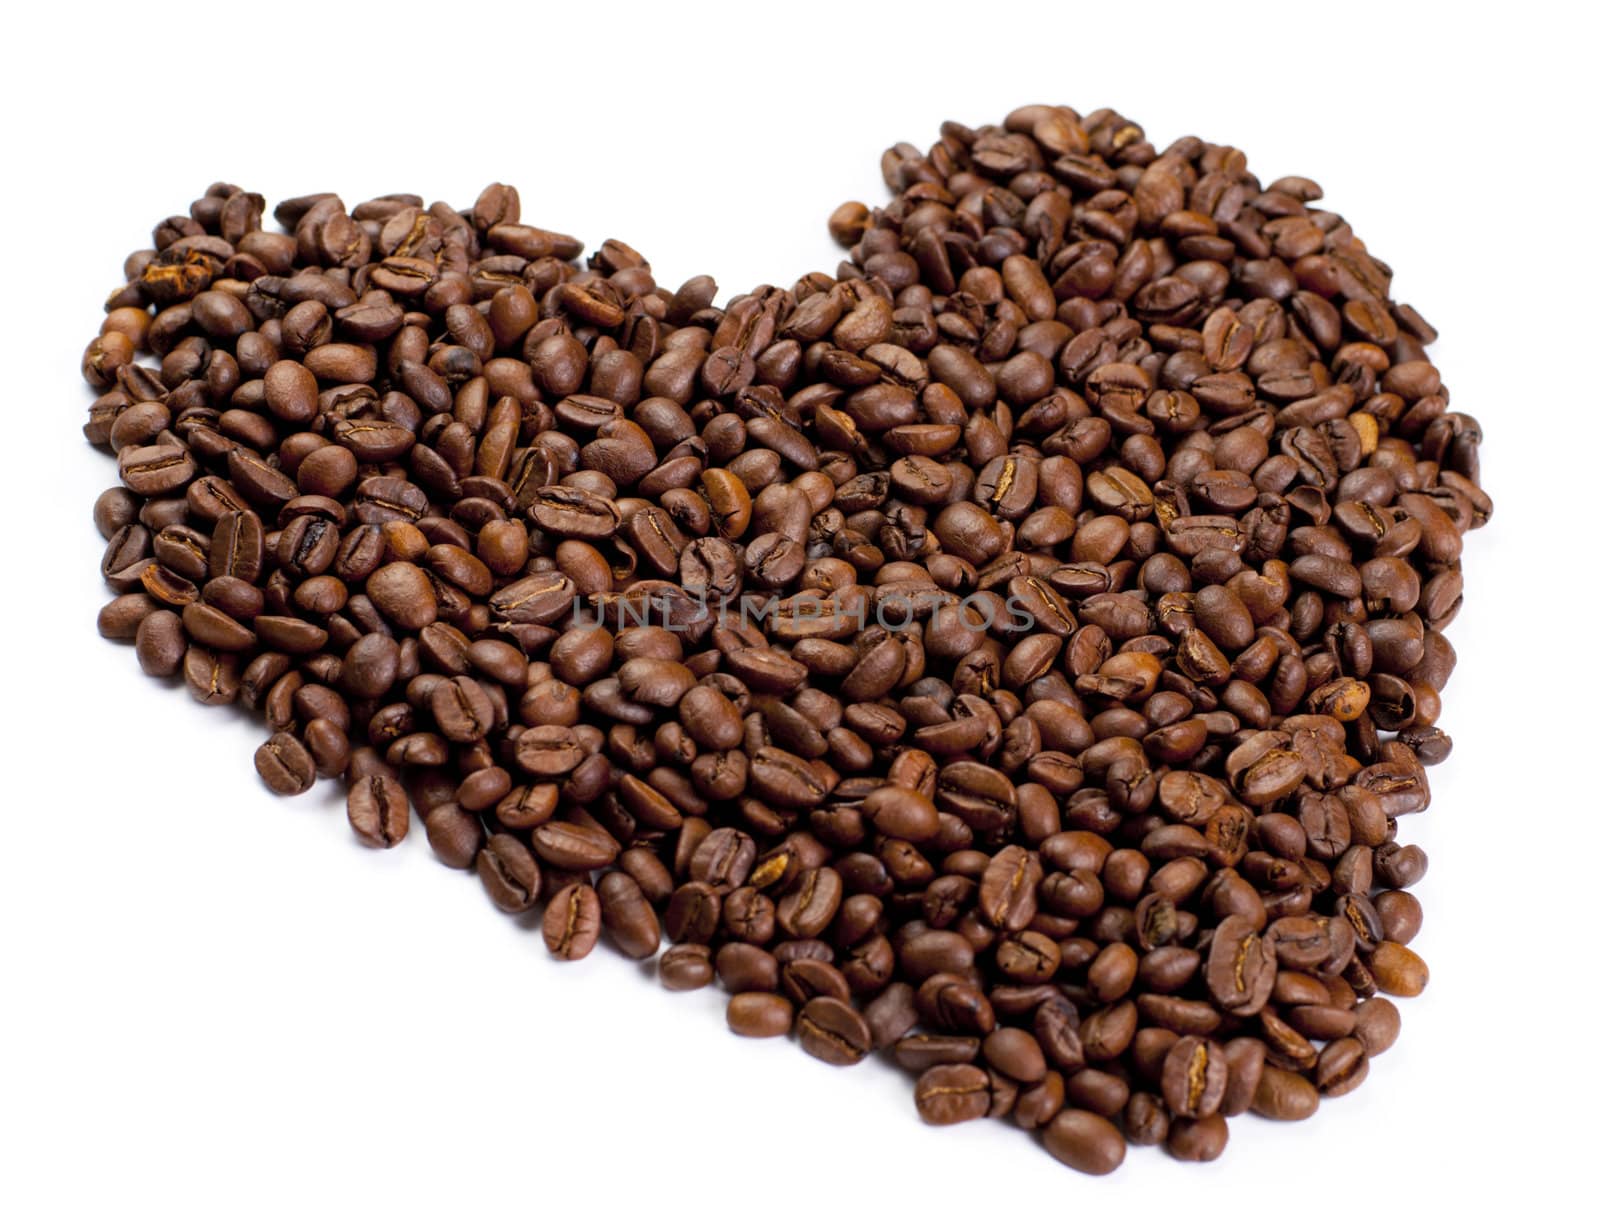 Heart made of coffee isolated on white background